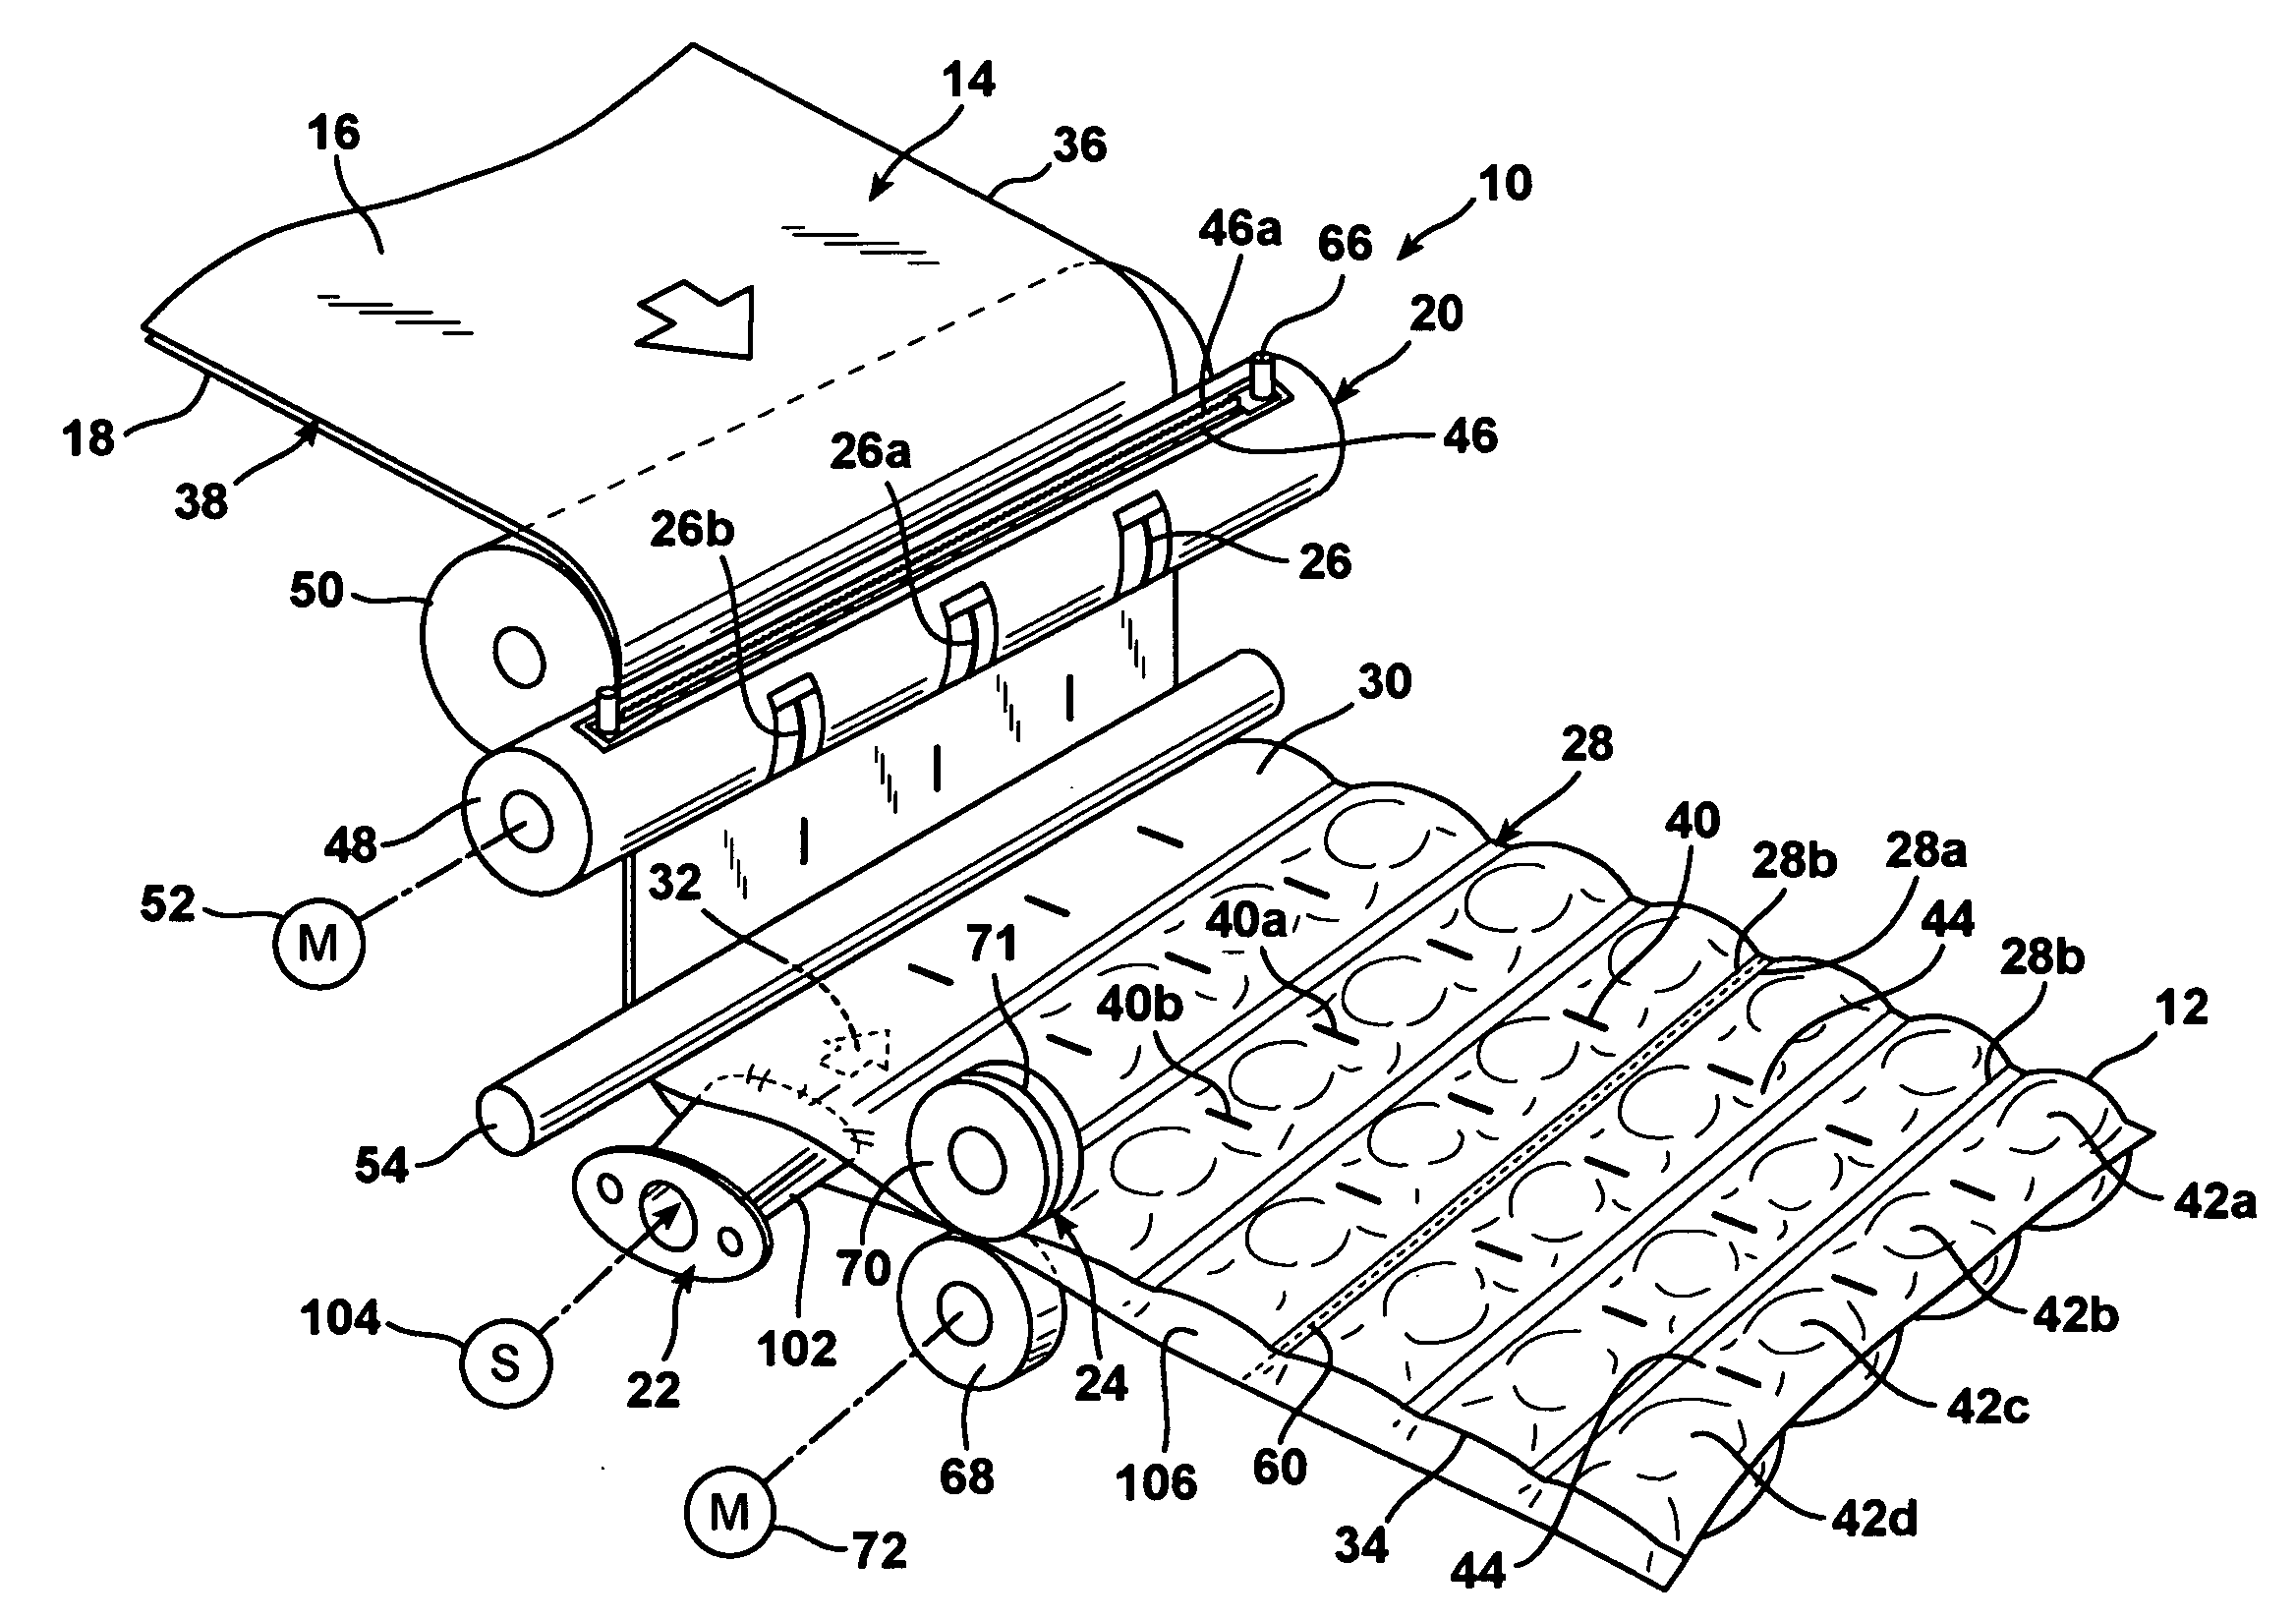 Apparatus and method for making inflated articles